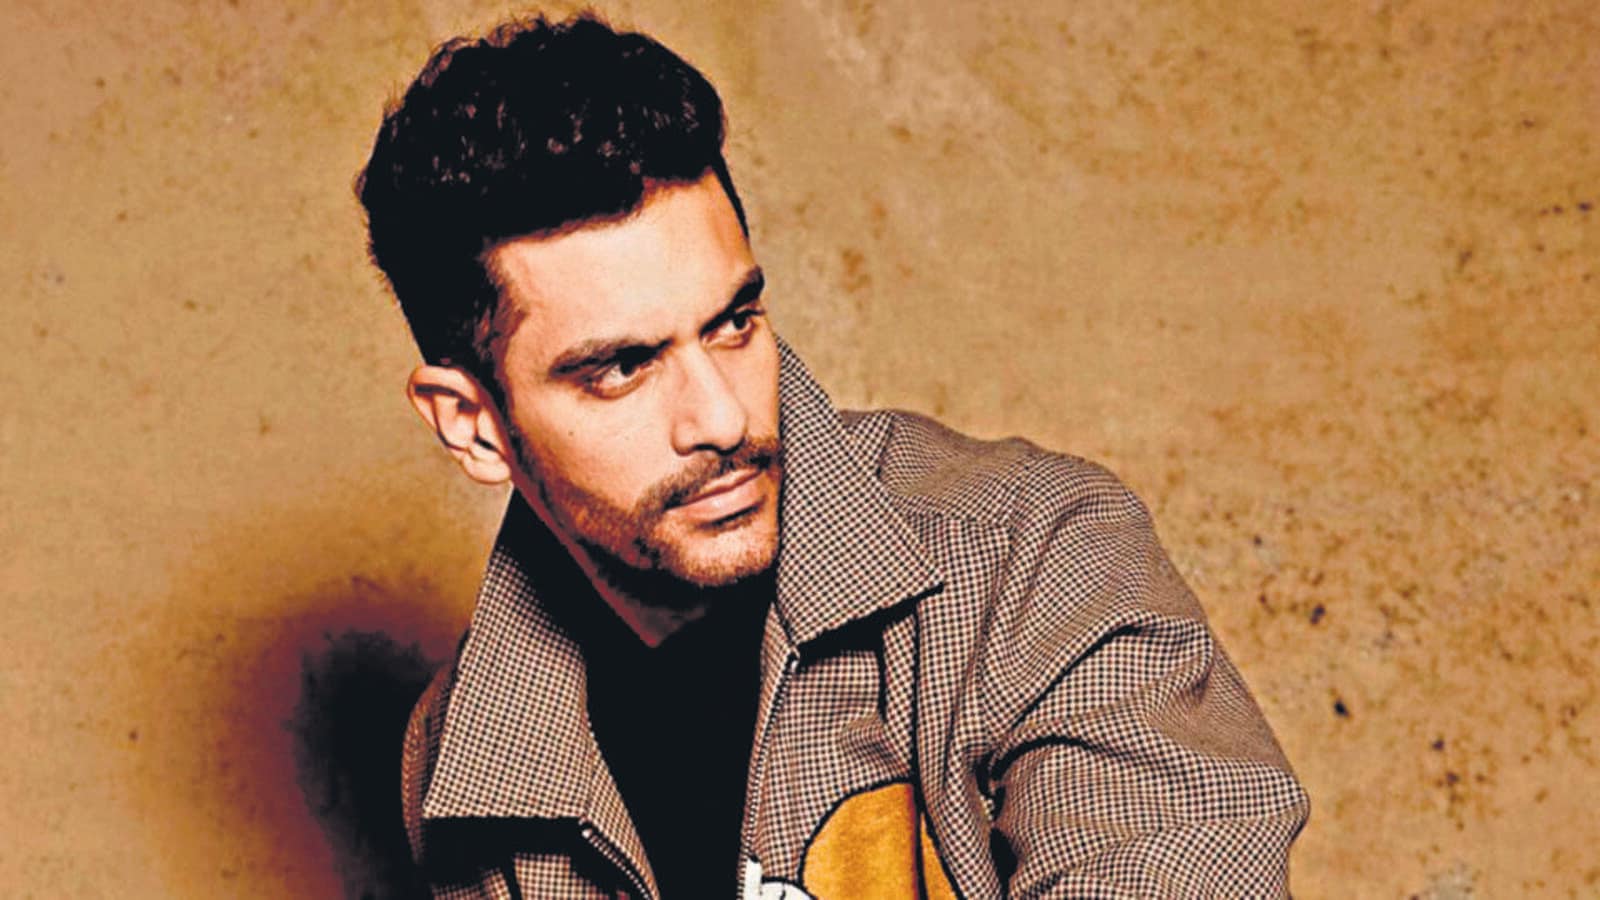 Angad Bedi’s preparing for a 400 metre sprinting race